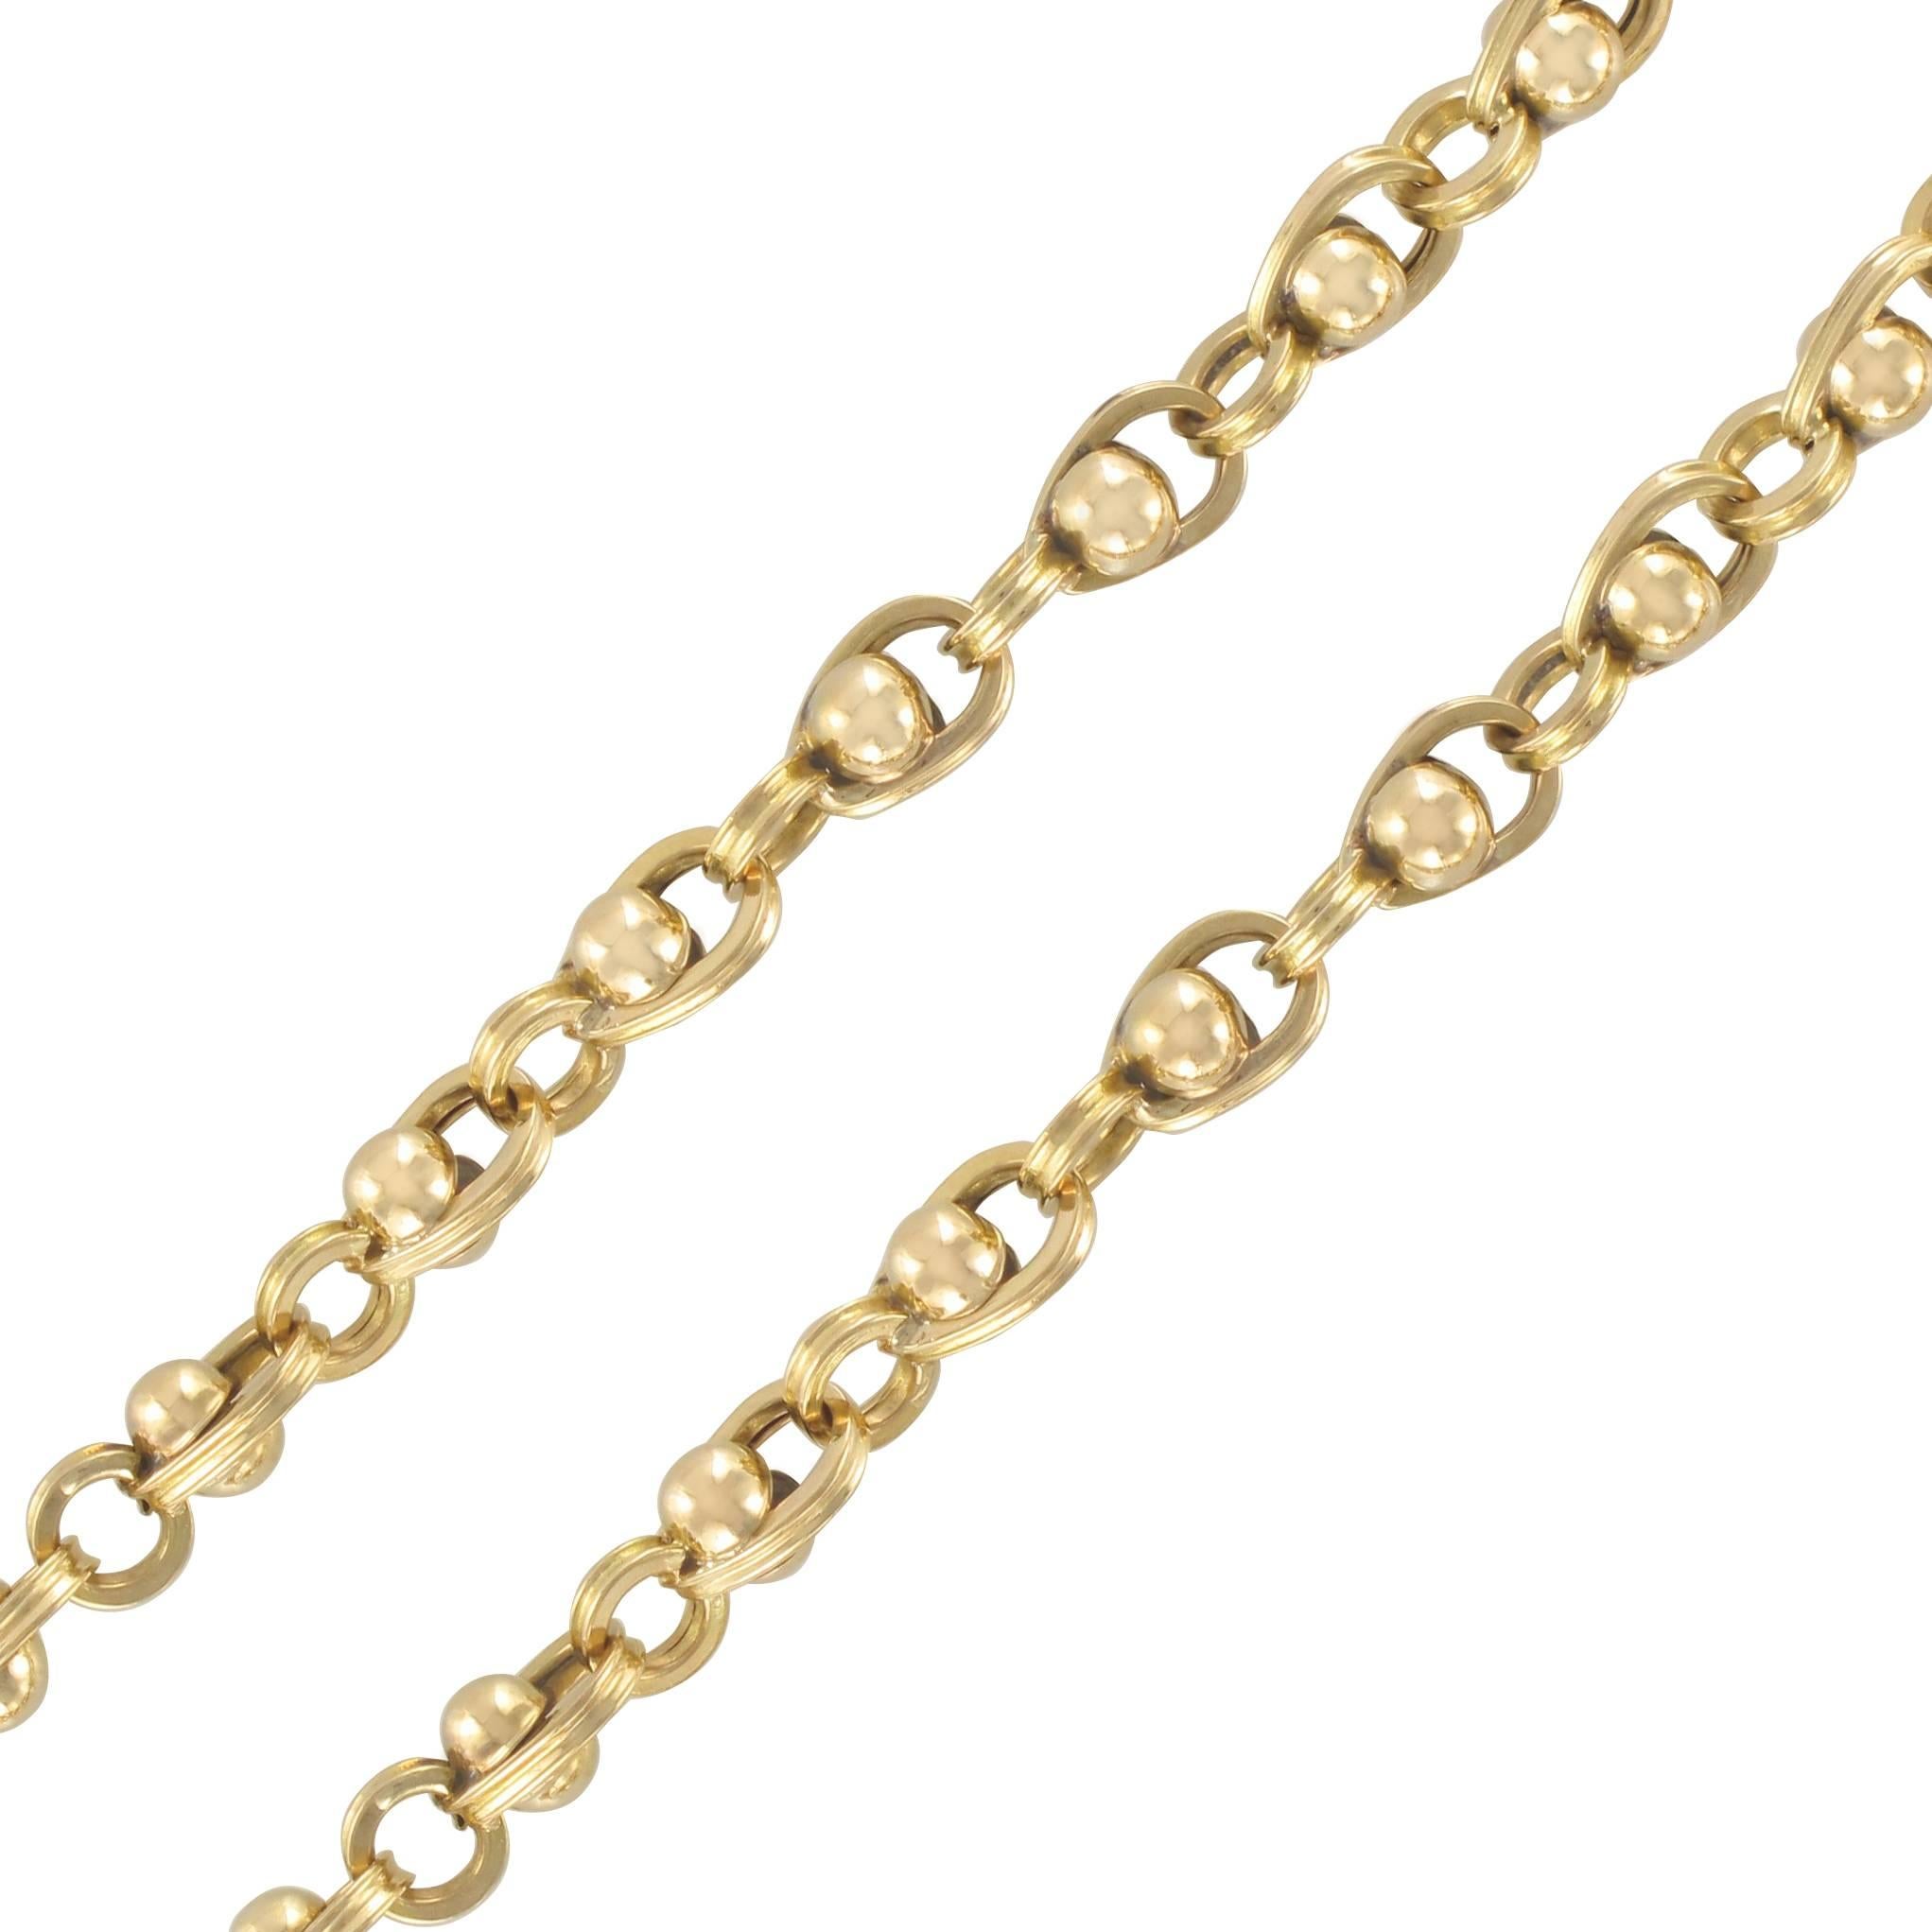 French 18 Karat Yellow Gold Beads Chain Necklace